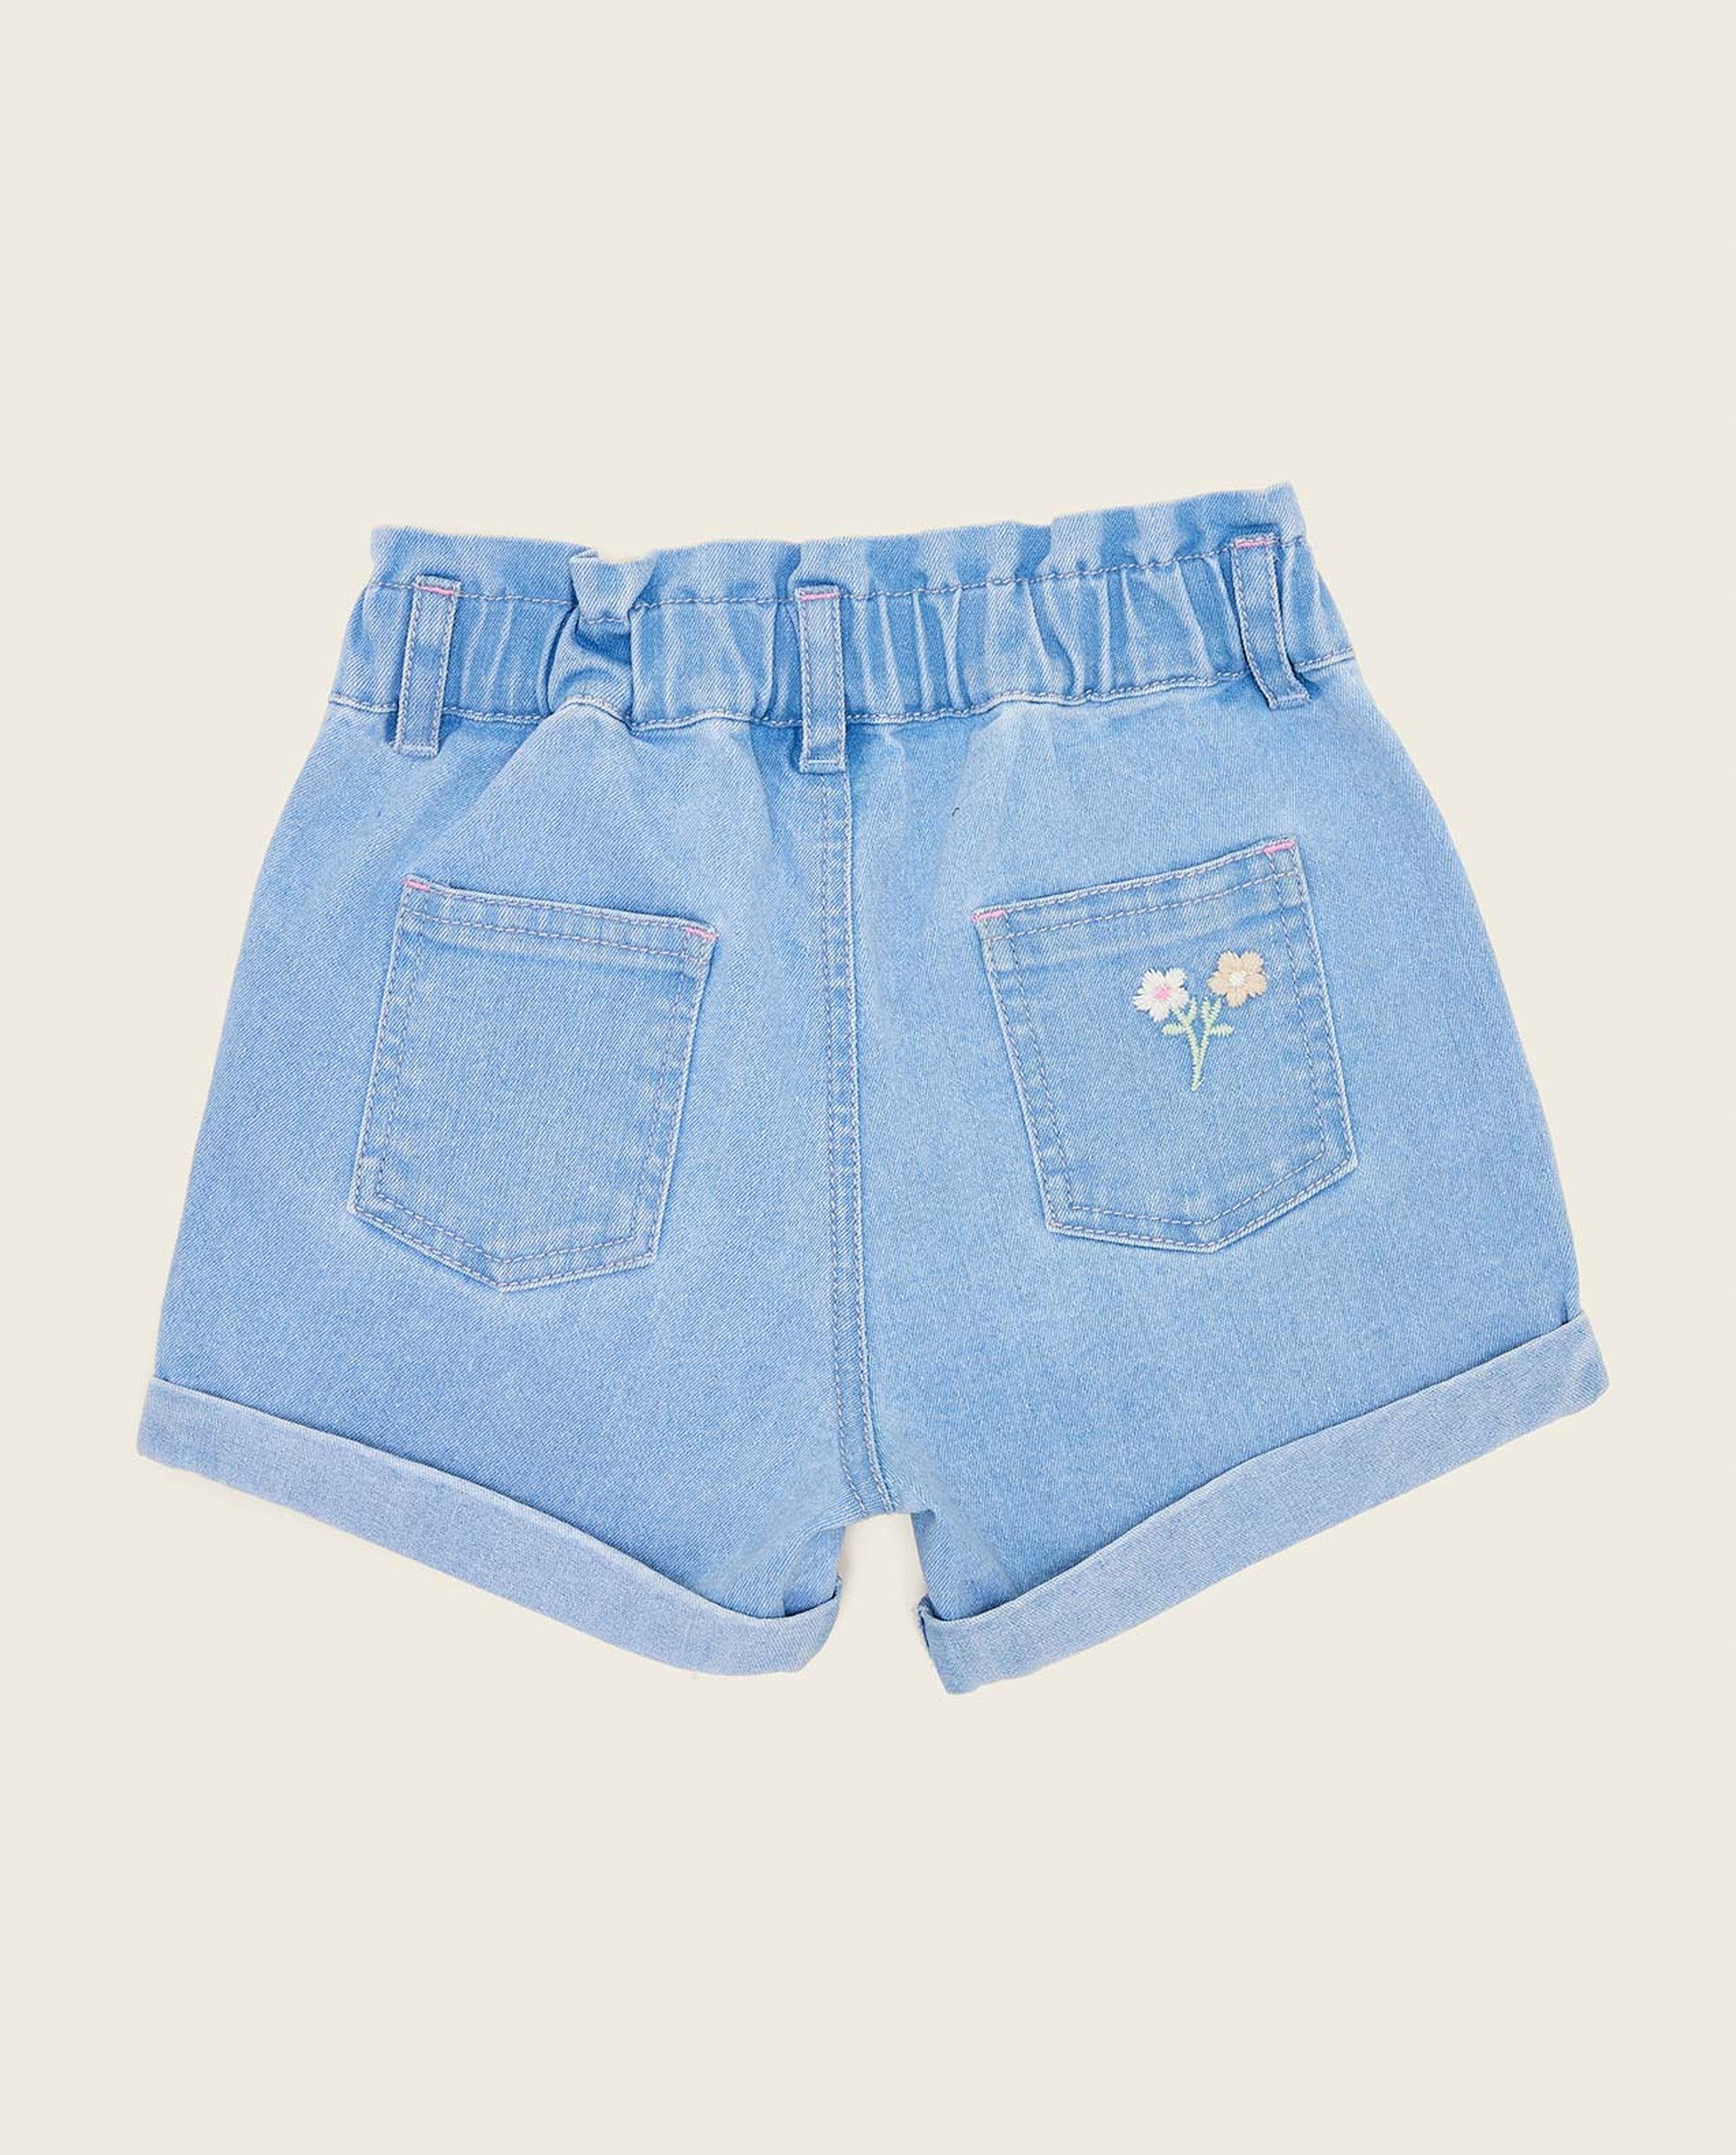 Embroidered Denim Shorts with Elastic Waist